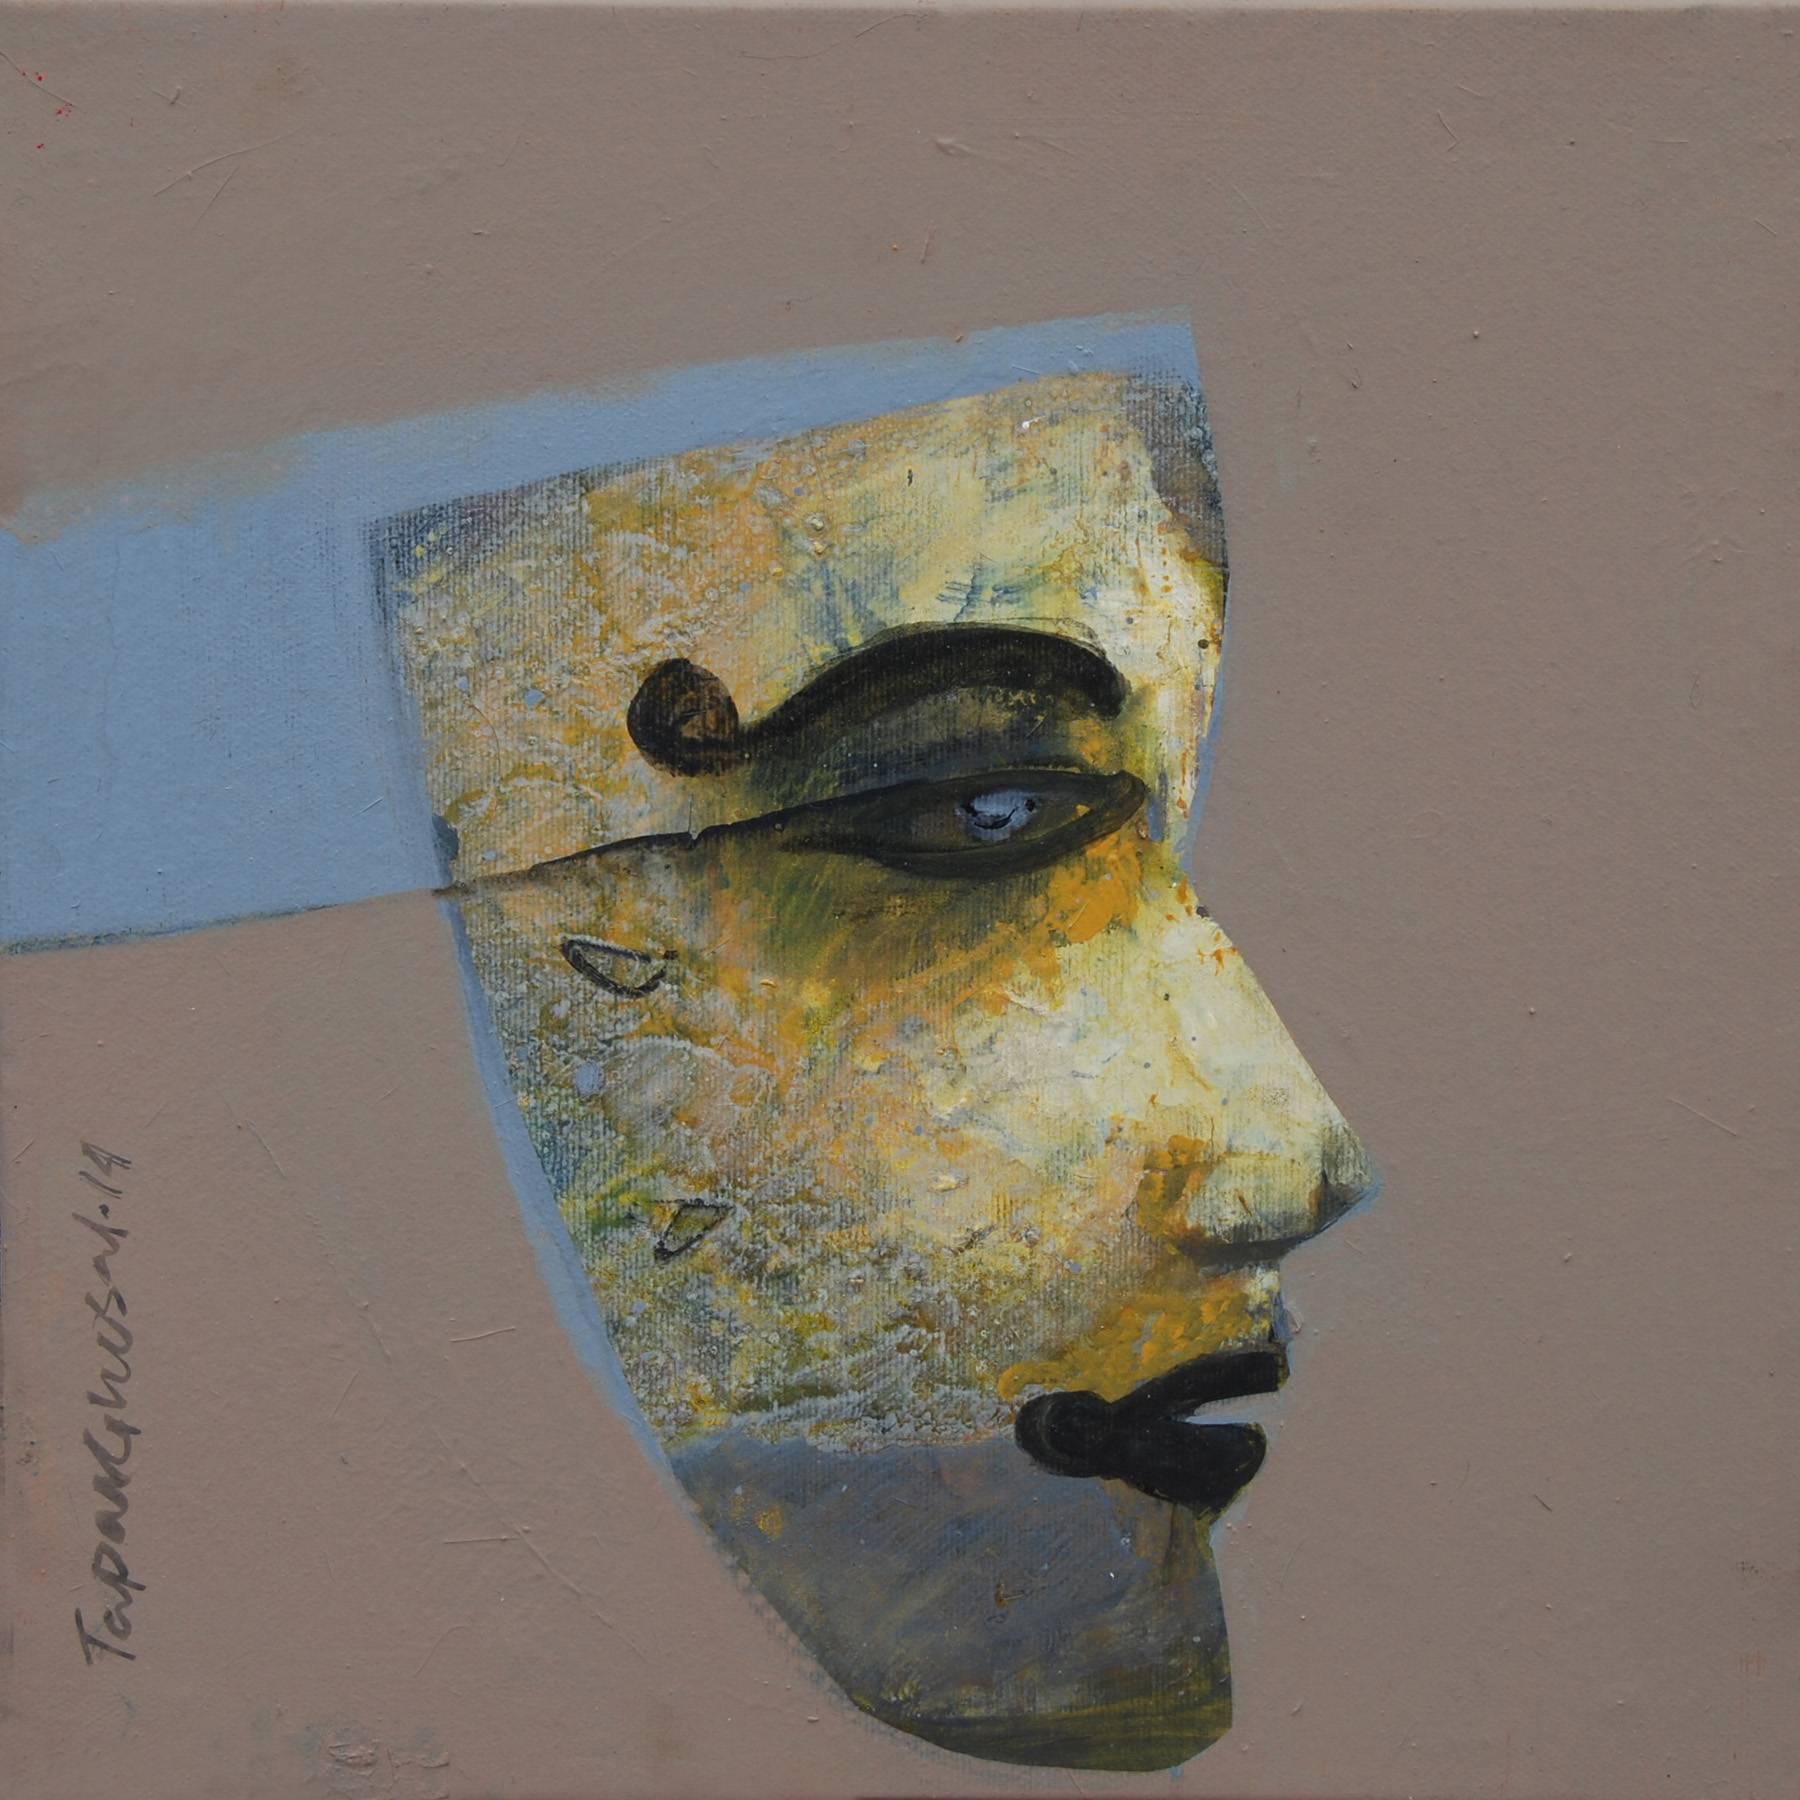 Tapas Ghosal Figurative Painting - Masked, Acrylic on Canvas by Contemporary Artist "In Stock"